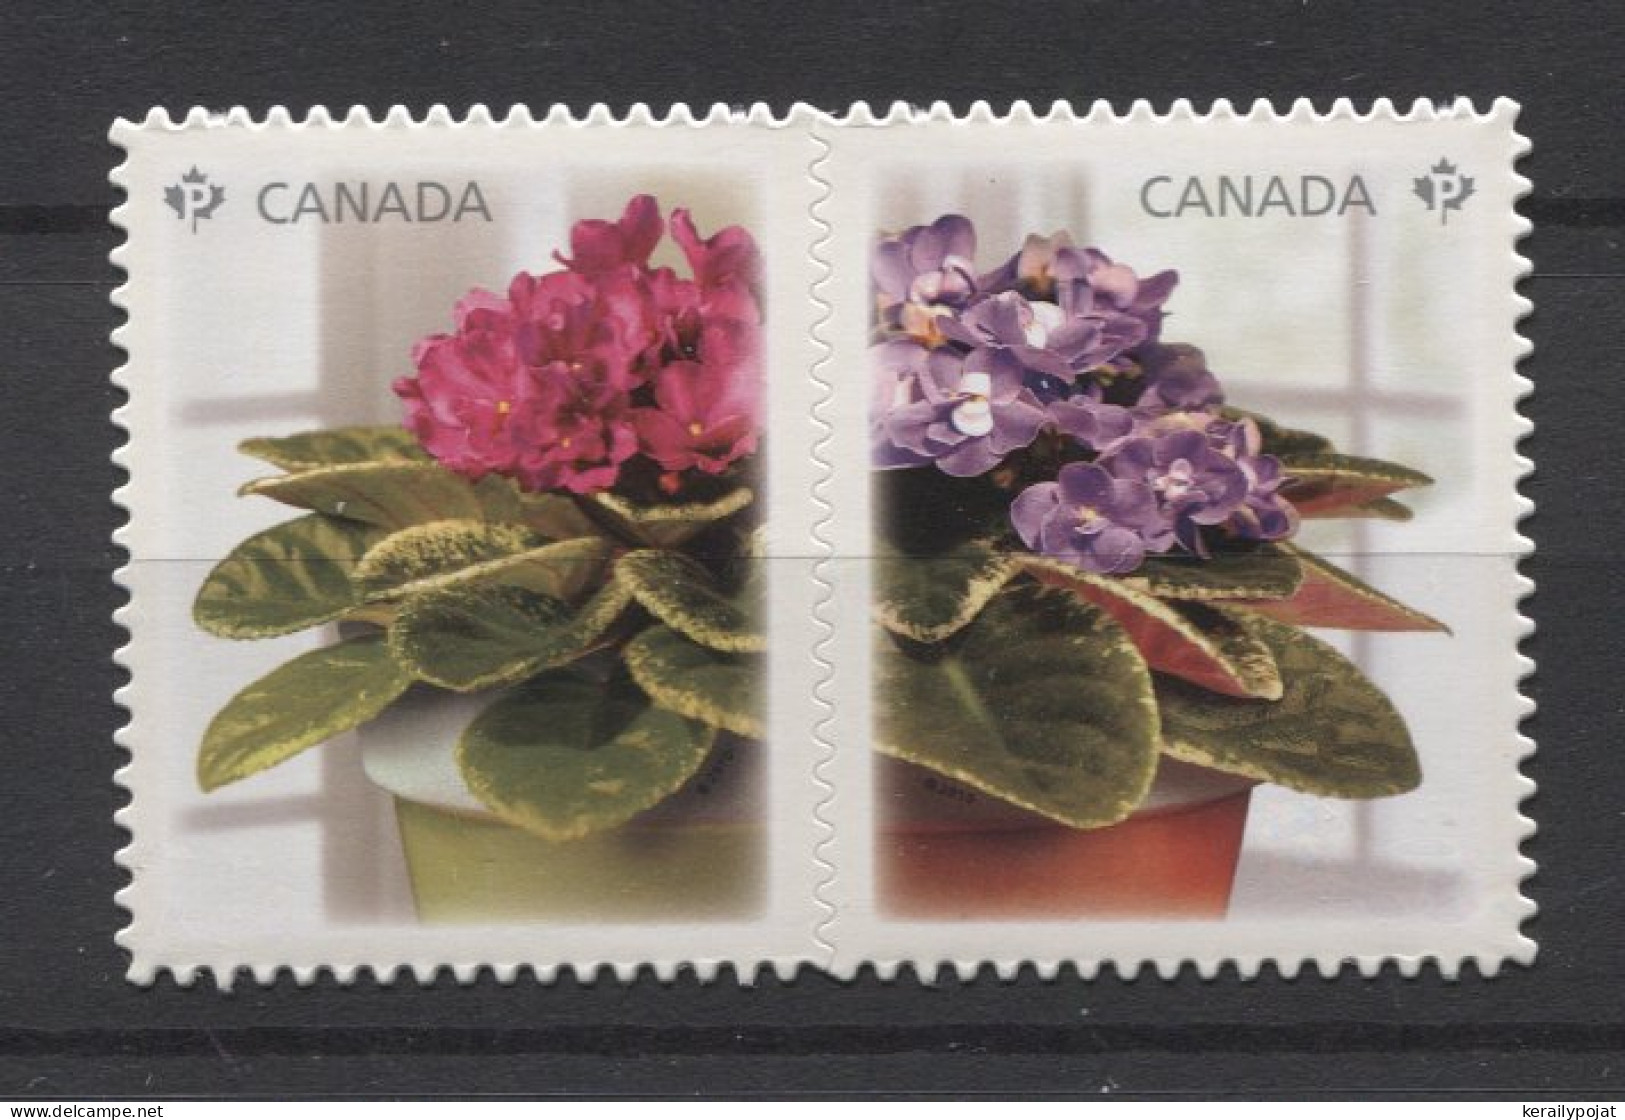 Canada - 2010 African Violets Self-adhesive__(TH-24847) - Ungebraucht